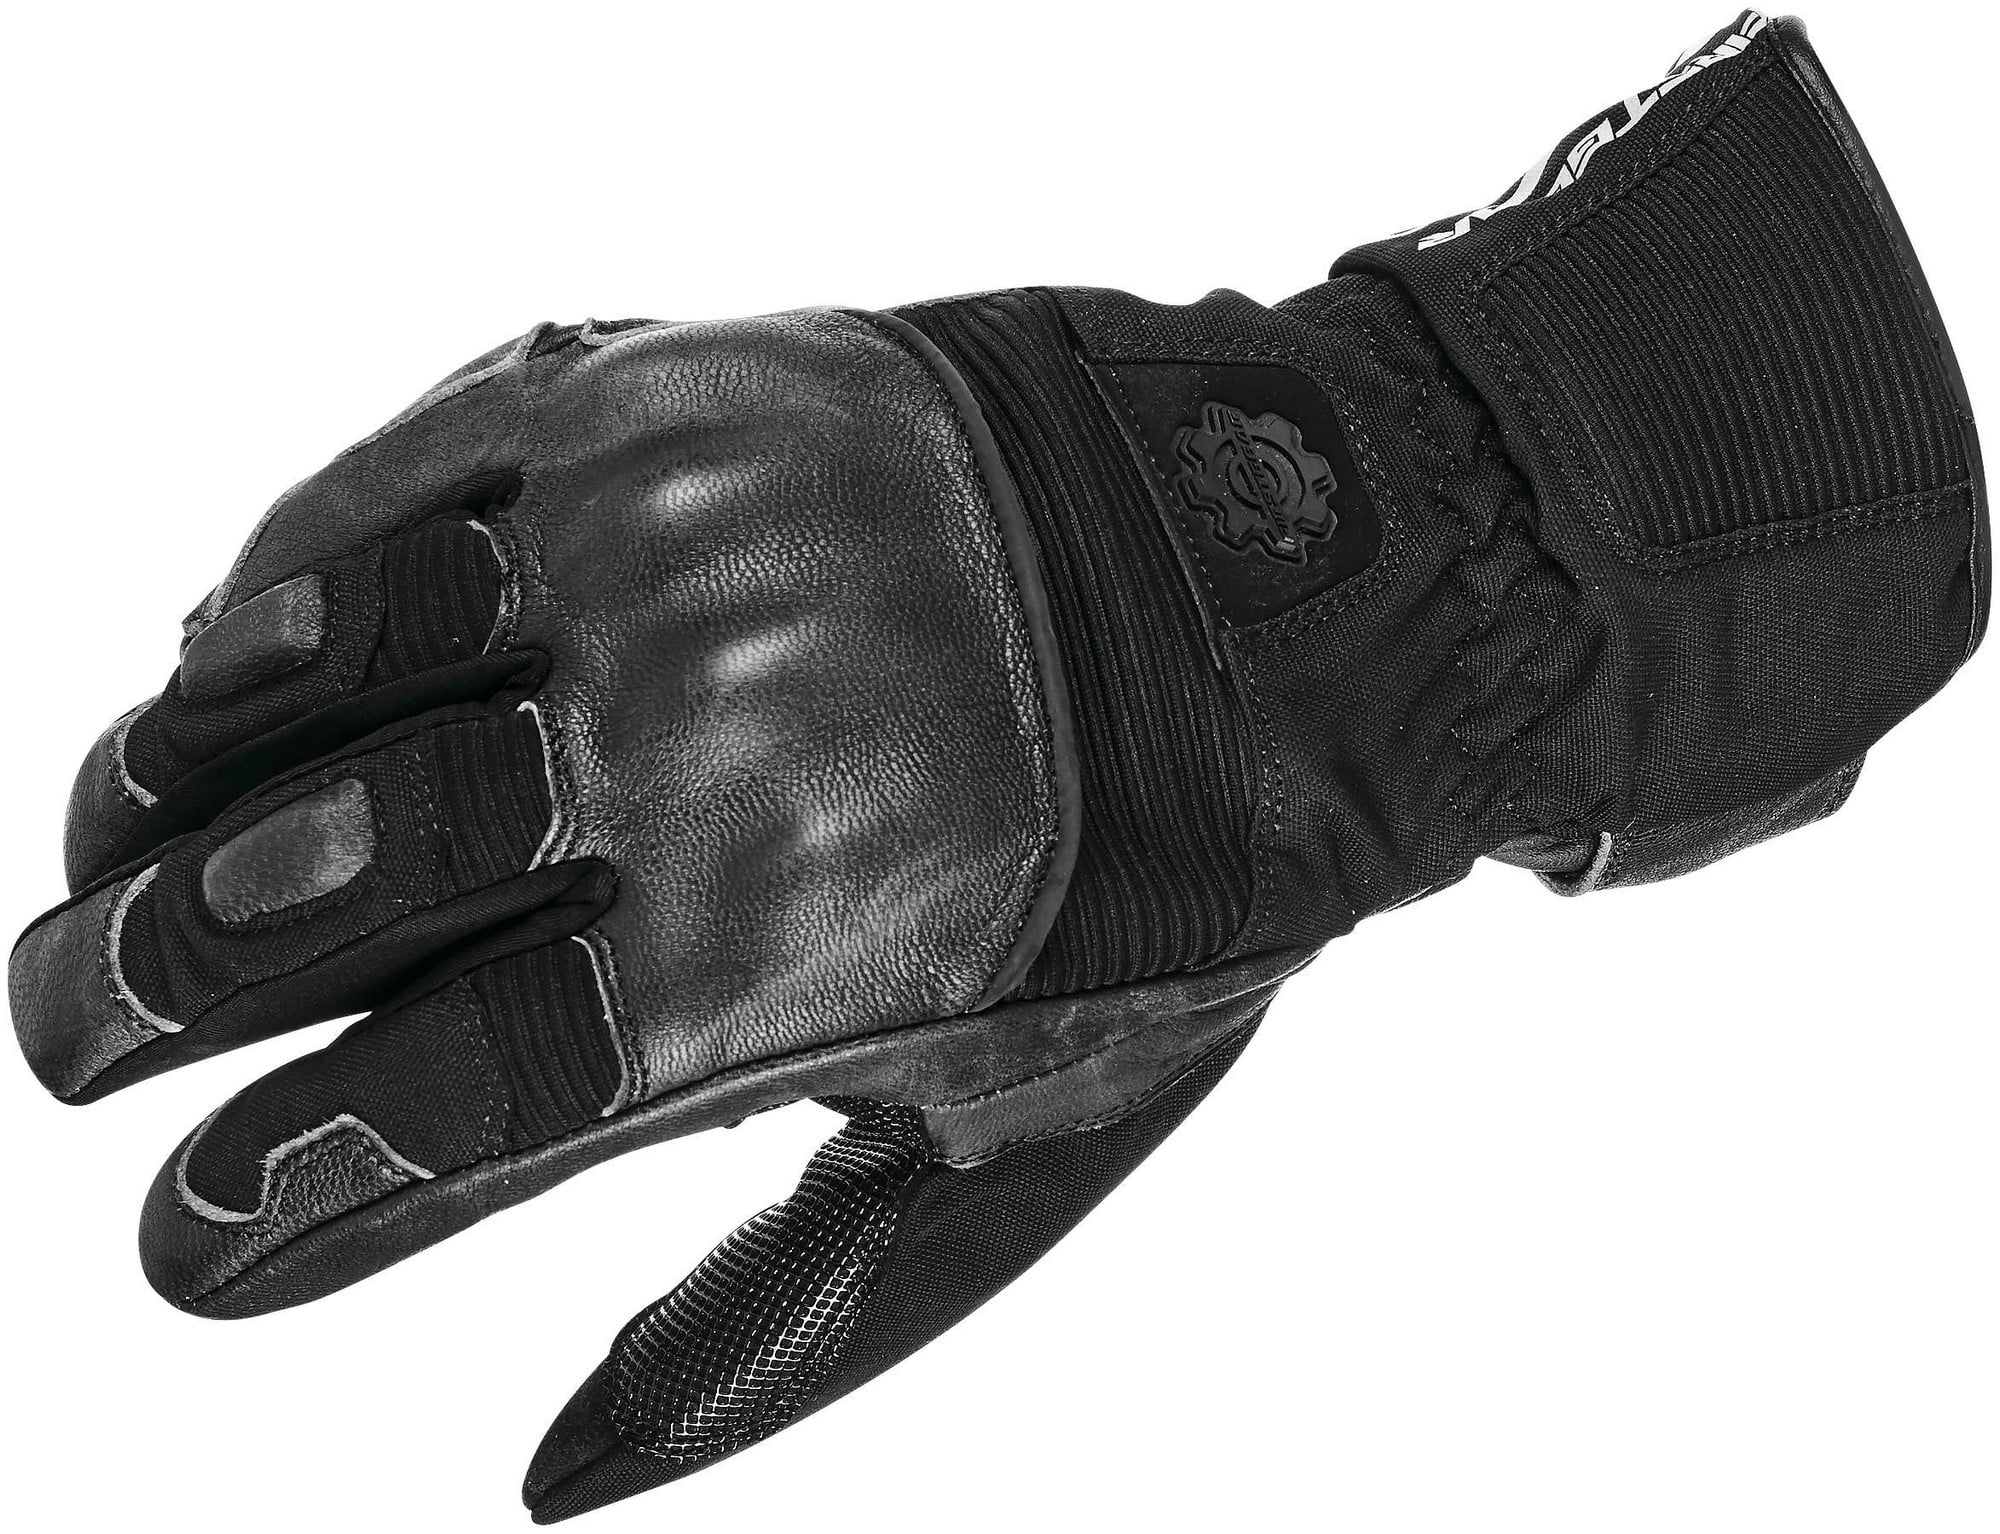 Perforated Black XX-Large motoboy Leather Motorcycle Gloves for Men and Women Summer Breathable Fingerless Motorbike Riding Gloves with Hard Kunckle Protector 